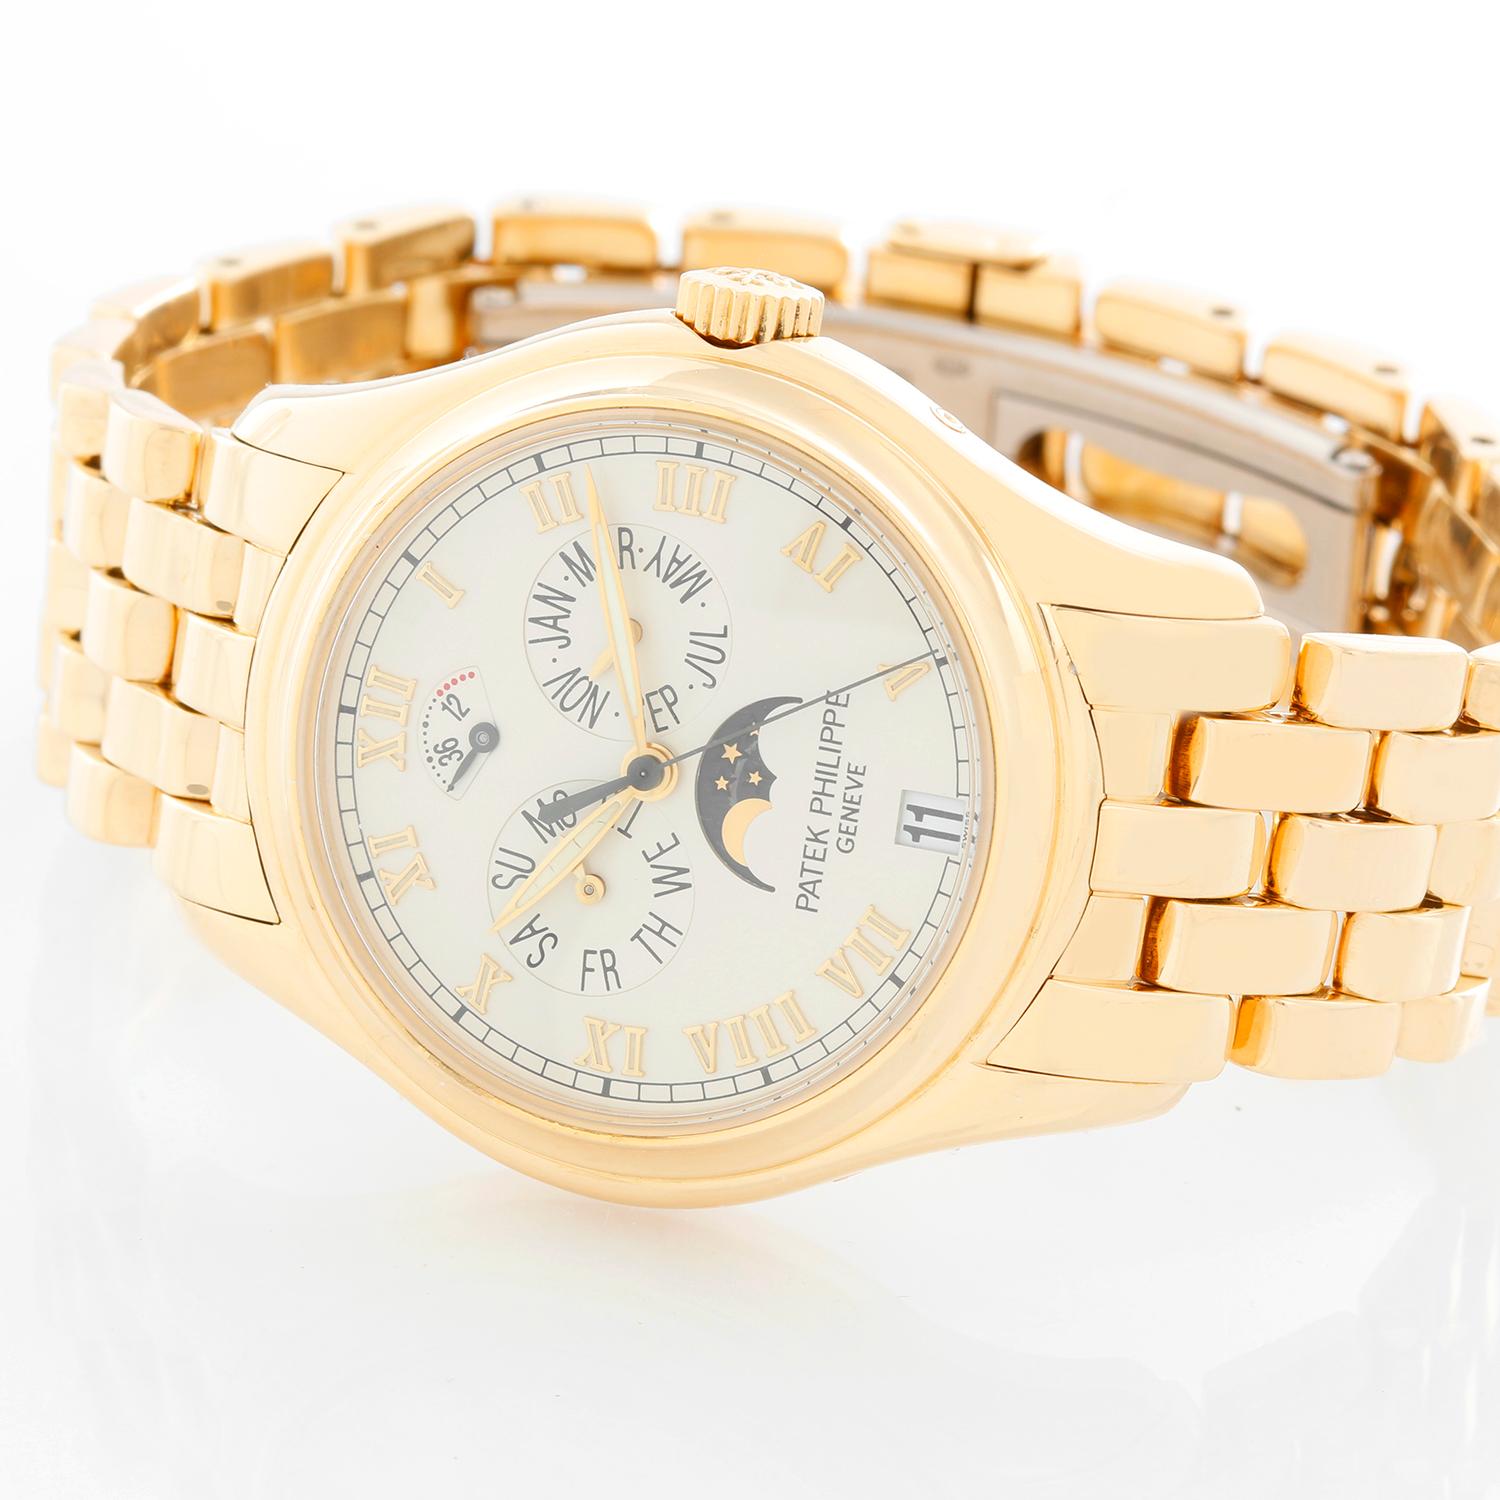 Patek Philippe Annual Calendar Men's 18k Yellow Gold Moonphase Watch 5036J (or 5036) -  Automatic winding with 18k gold rotor. 18k yellow gold with exposition back (36mm diameter). Silver dial with raised Roman numerals;  power reserve indicator,